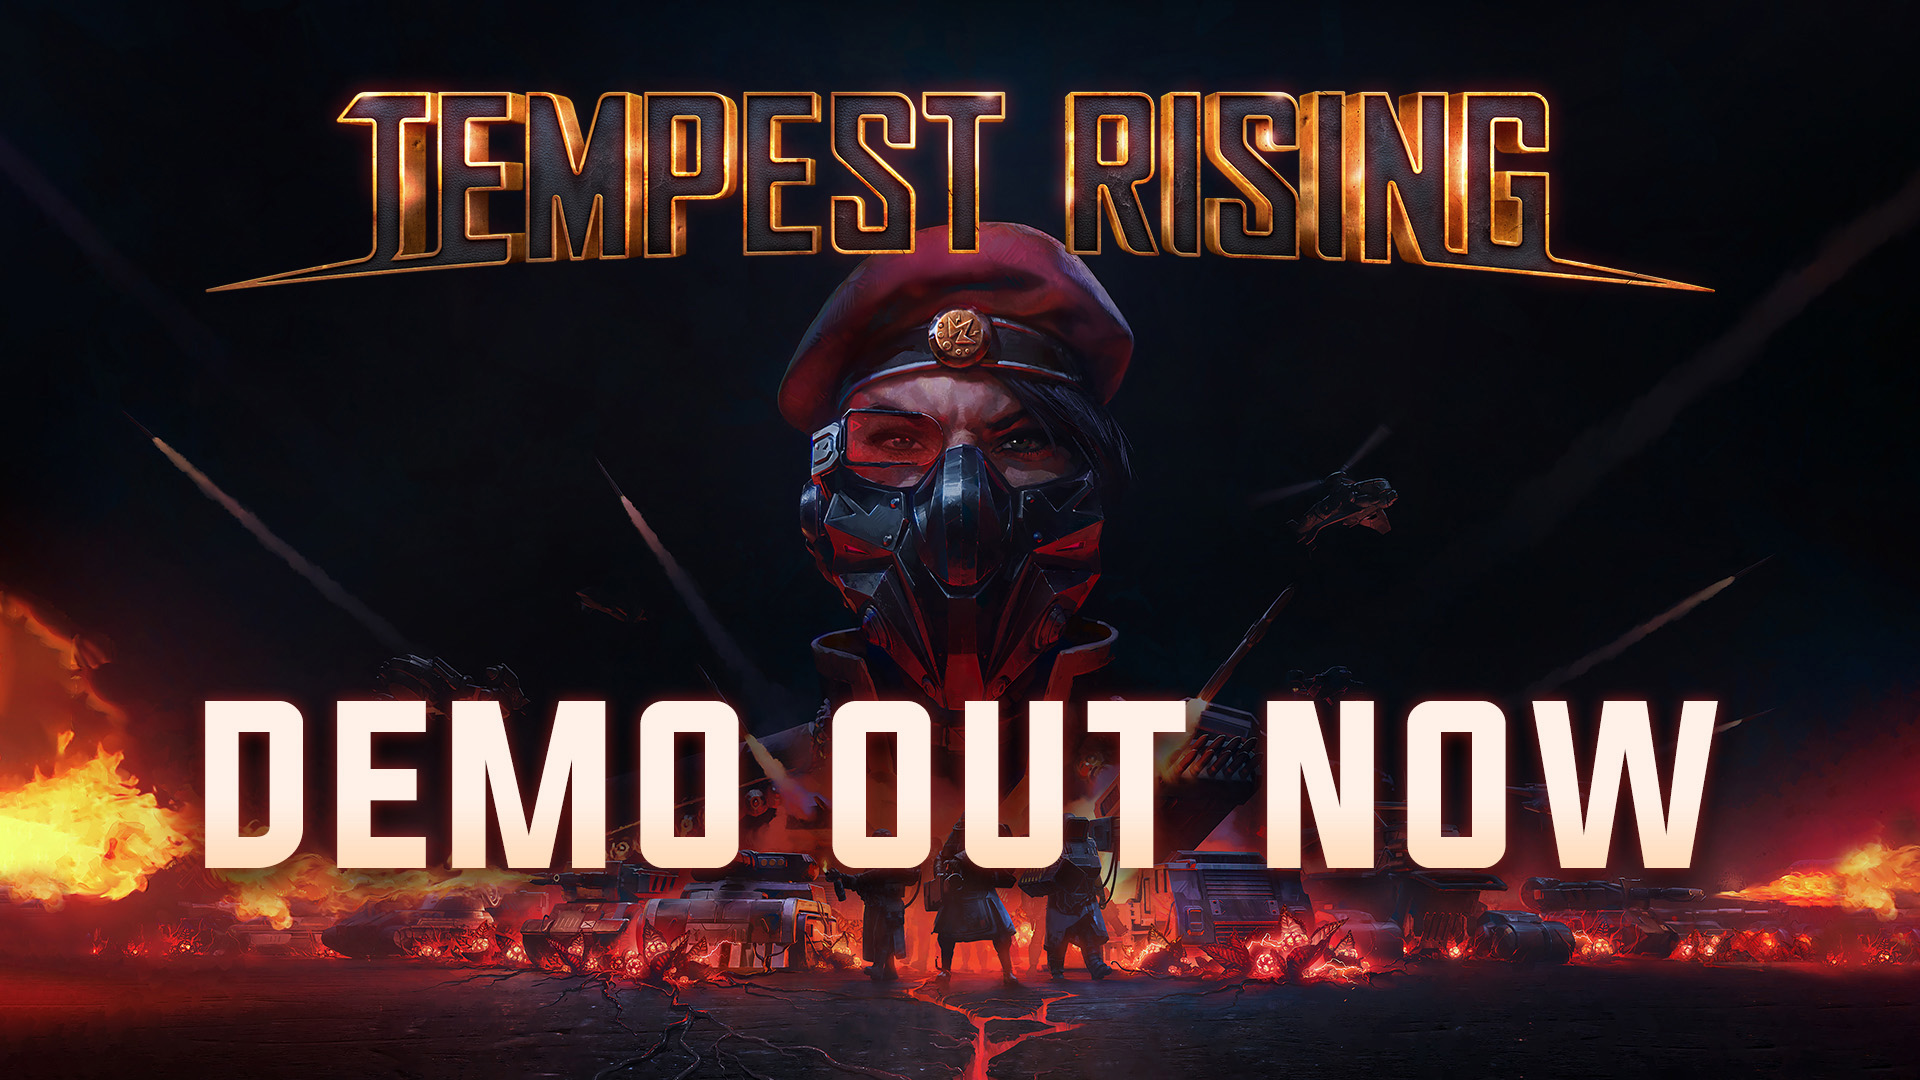 The Tempest Rising Demo is now Available!